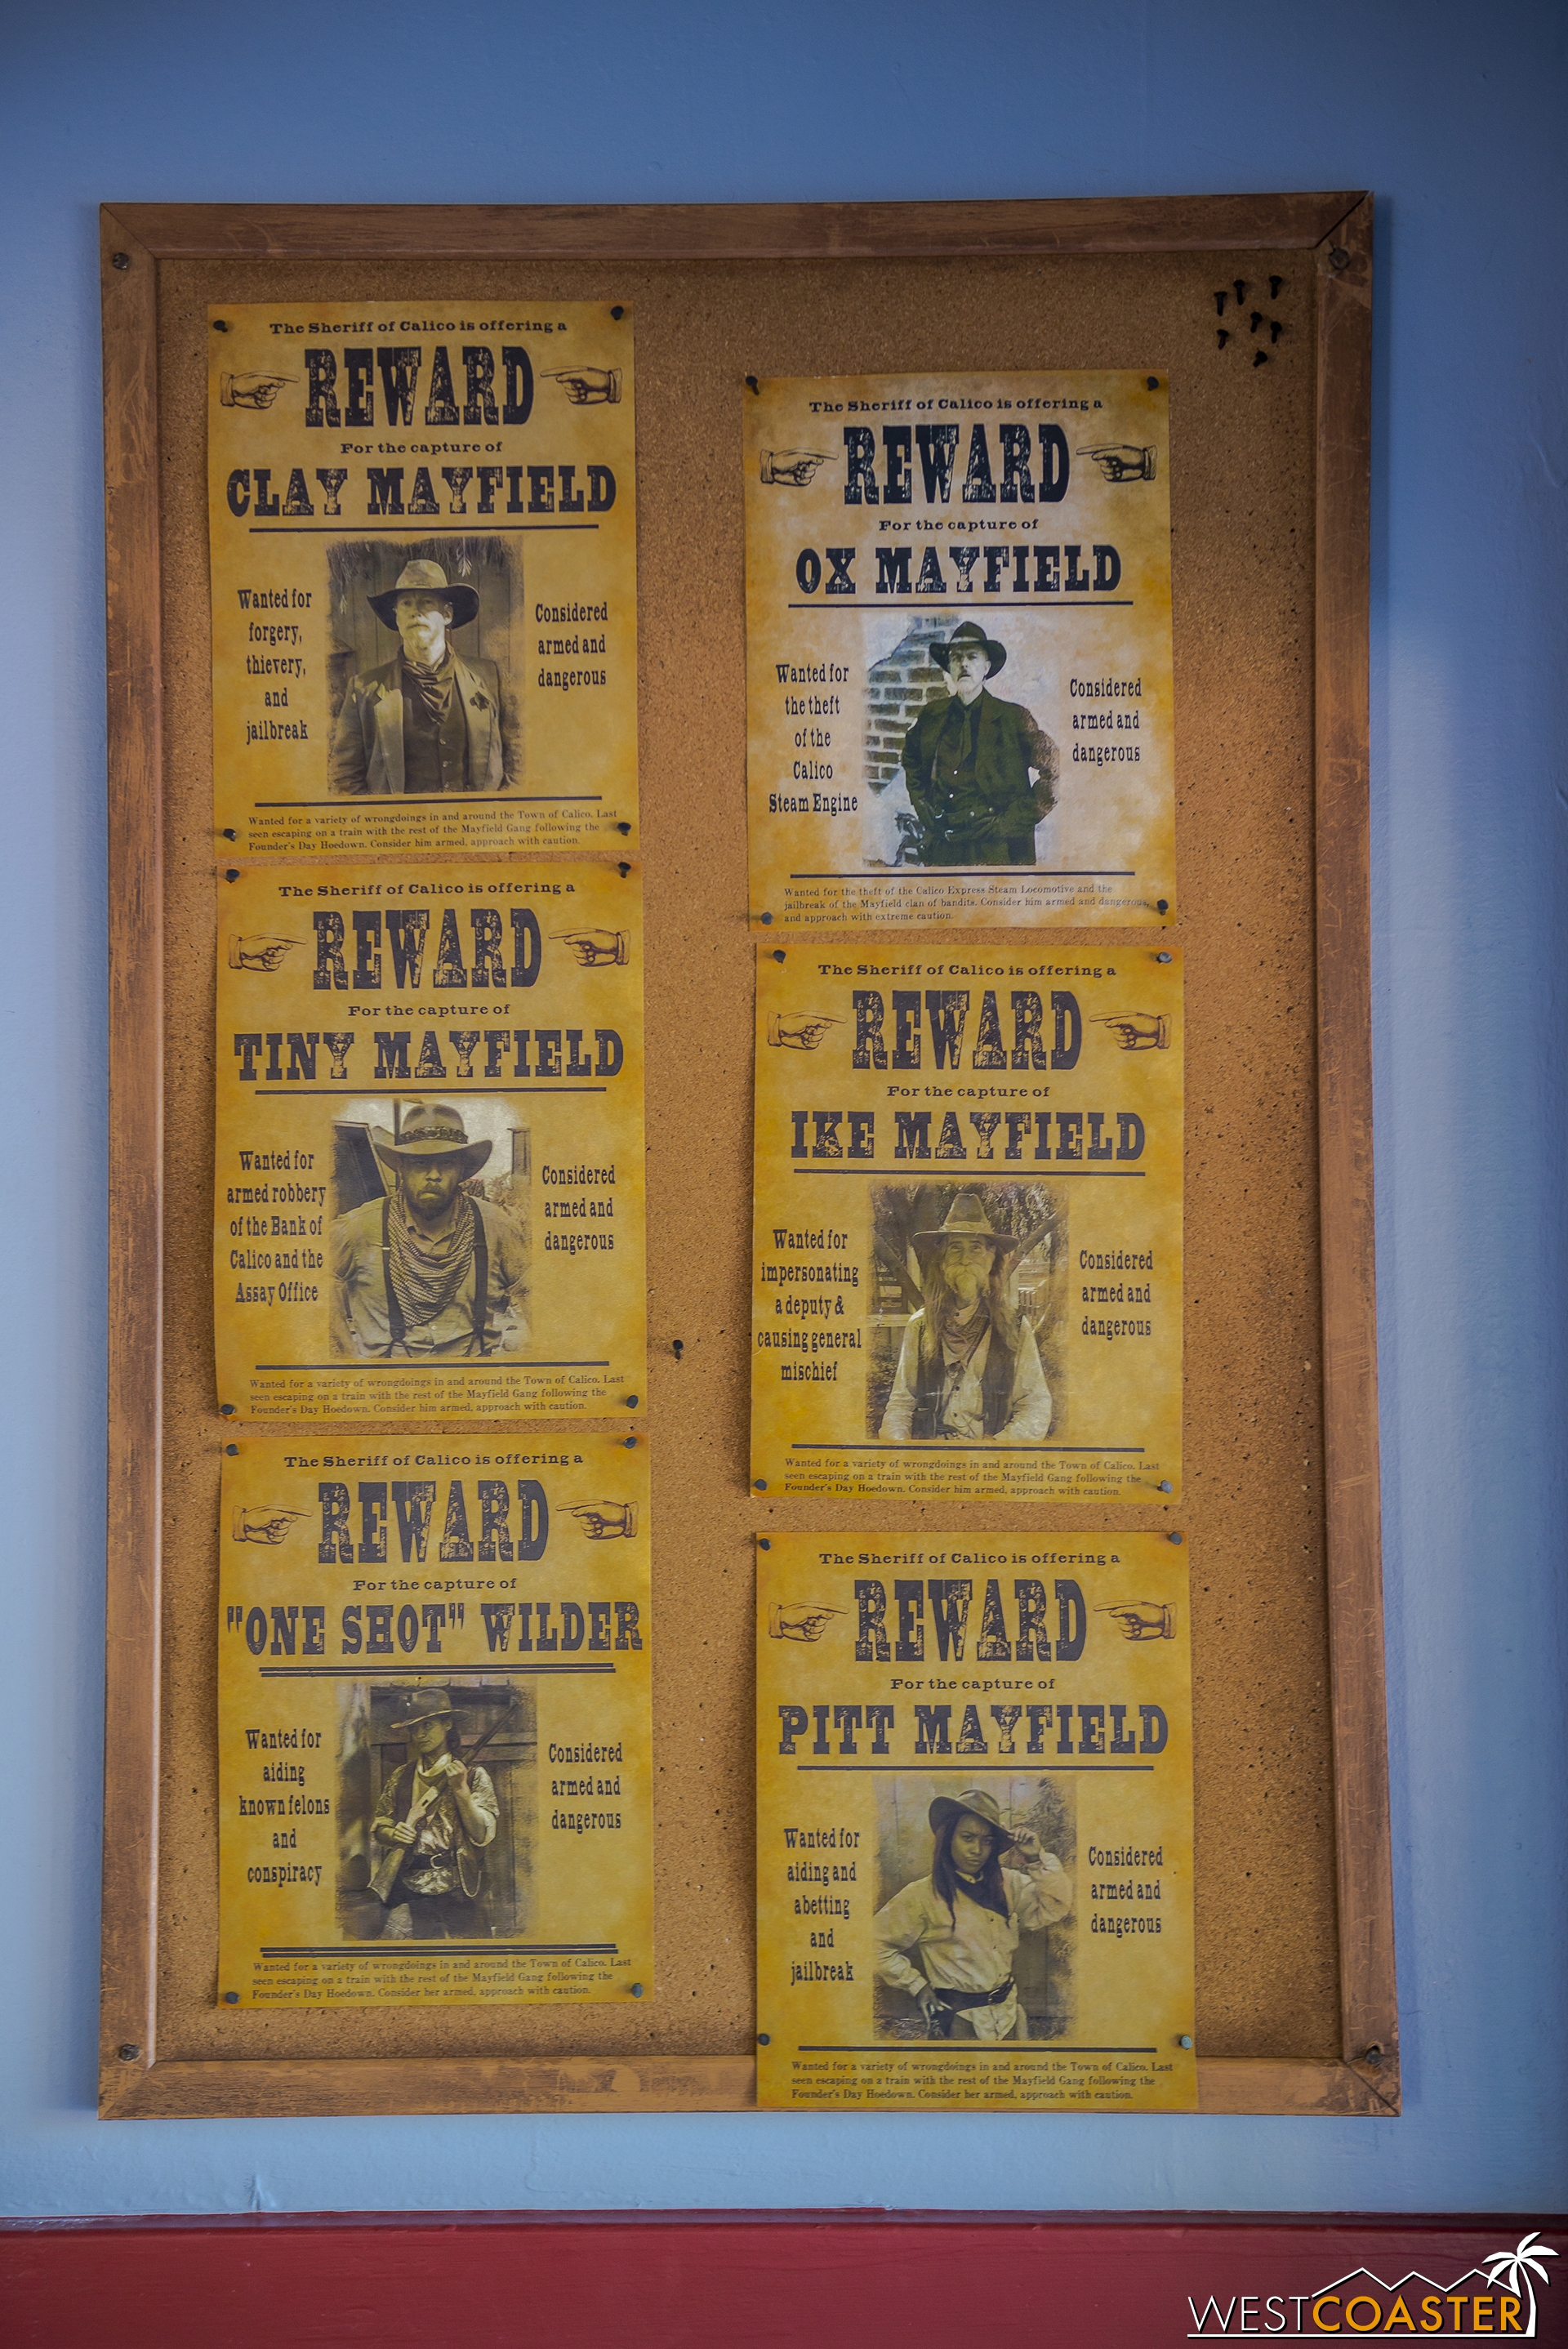  Wanted posters for the Mayfield clan. &nbsp;I didn't see Pitt or "One Shot" during my visit. &nbsp;And Ox remains at large. 